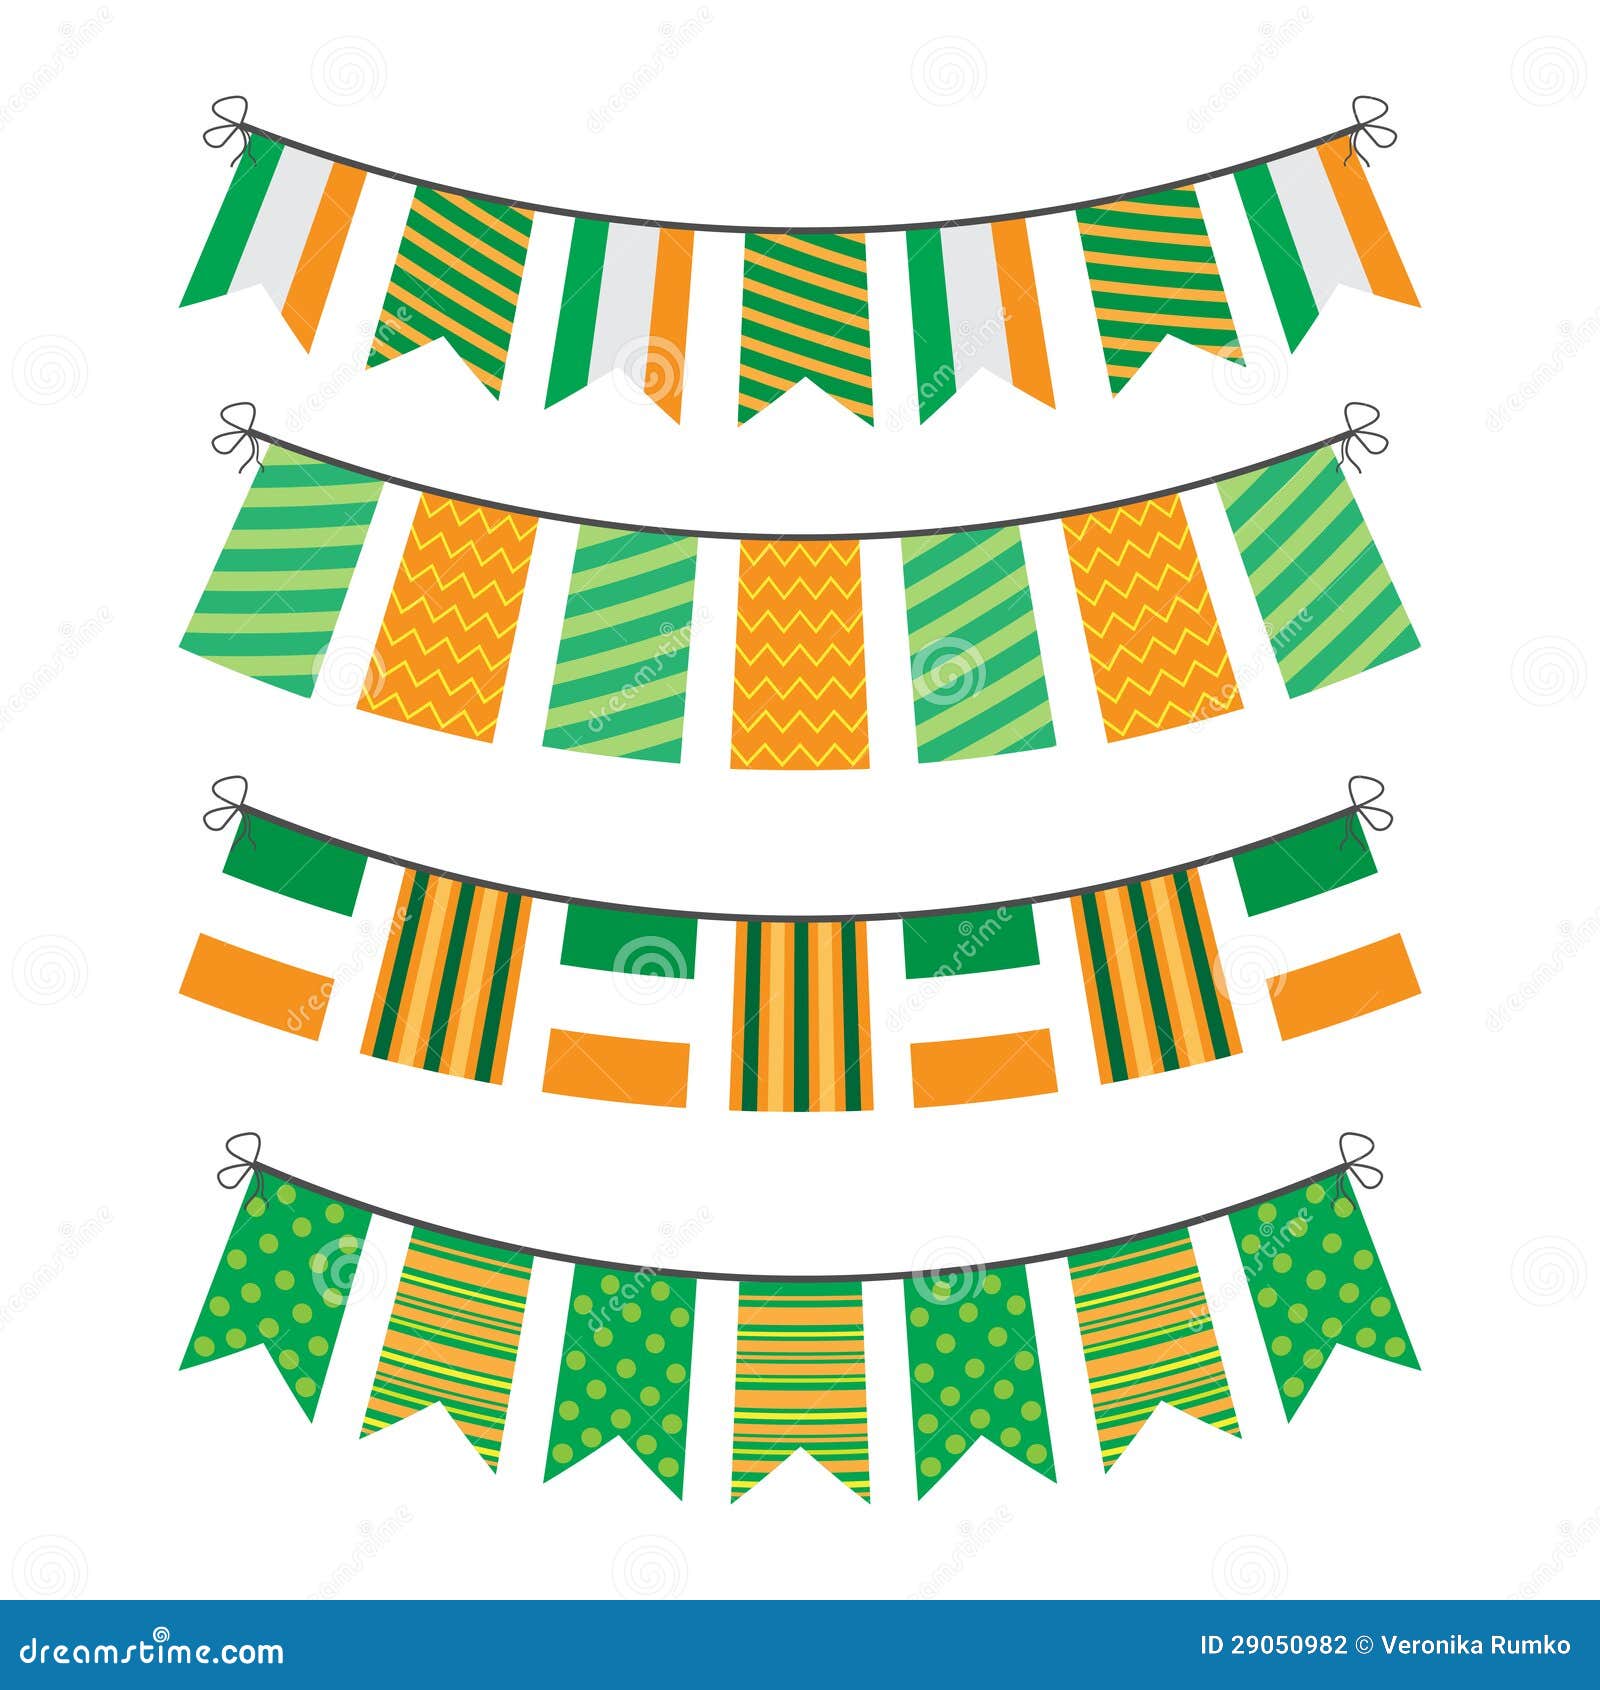 bunting-of-flags-stock-vector-illustration-of-bunting-29050982